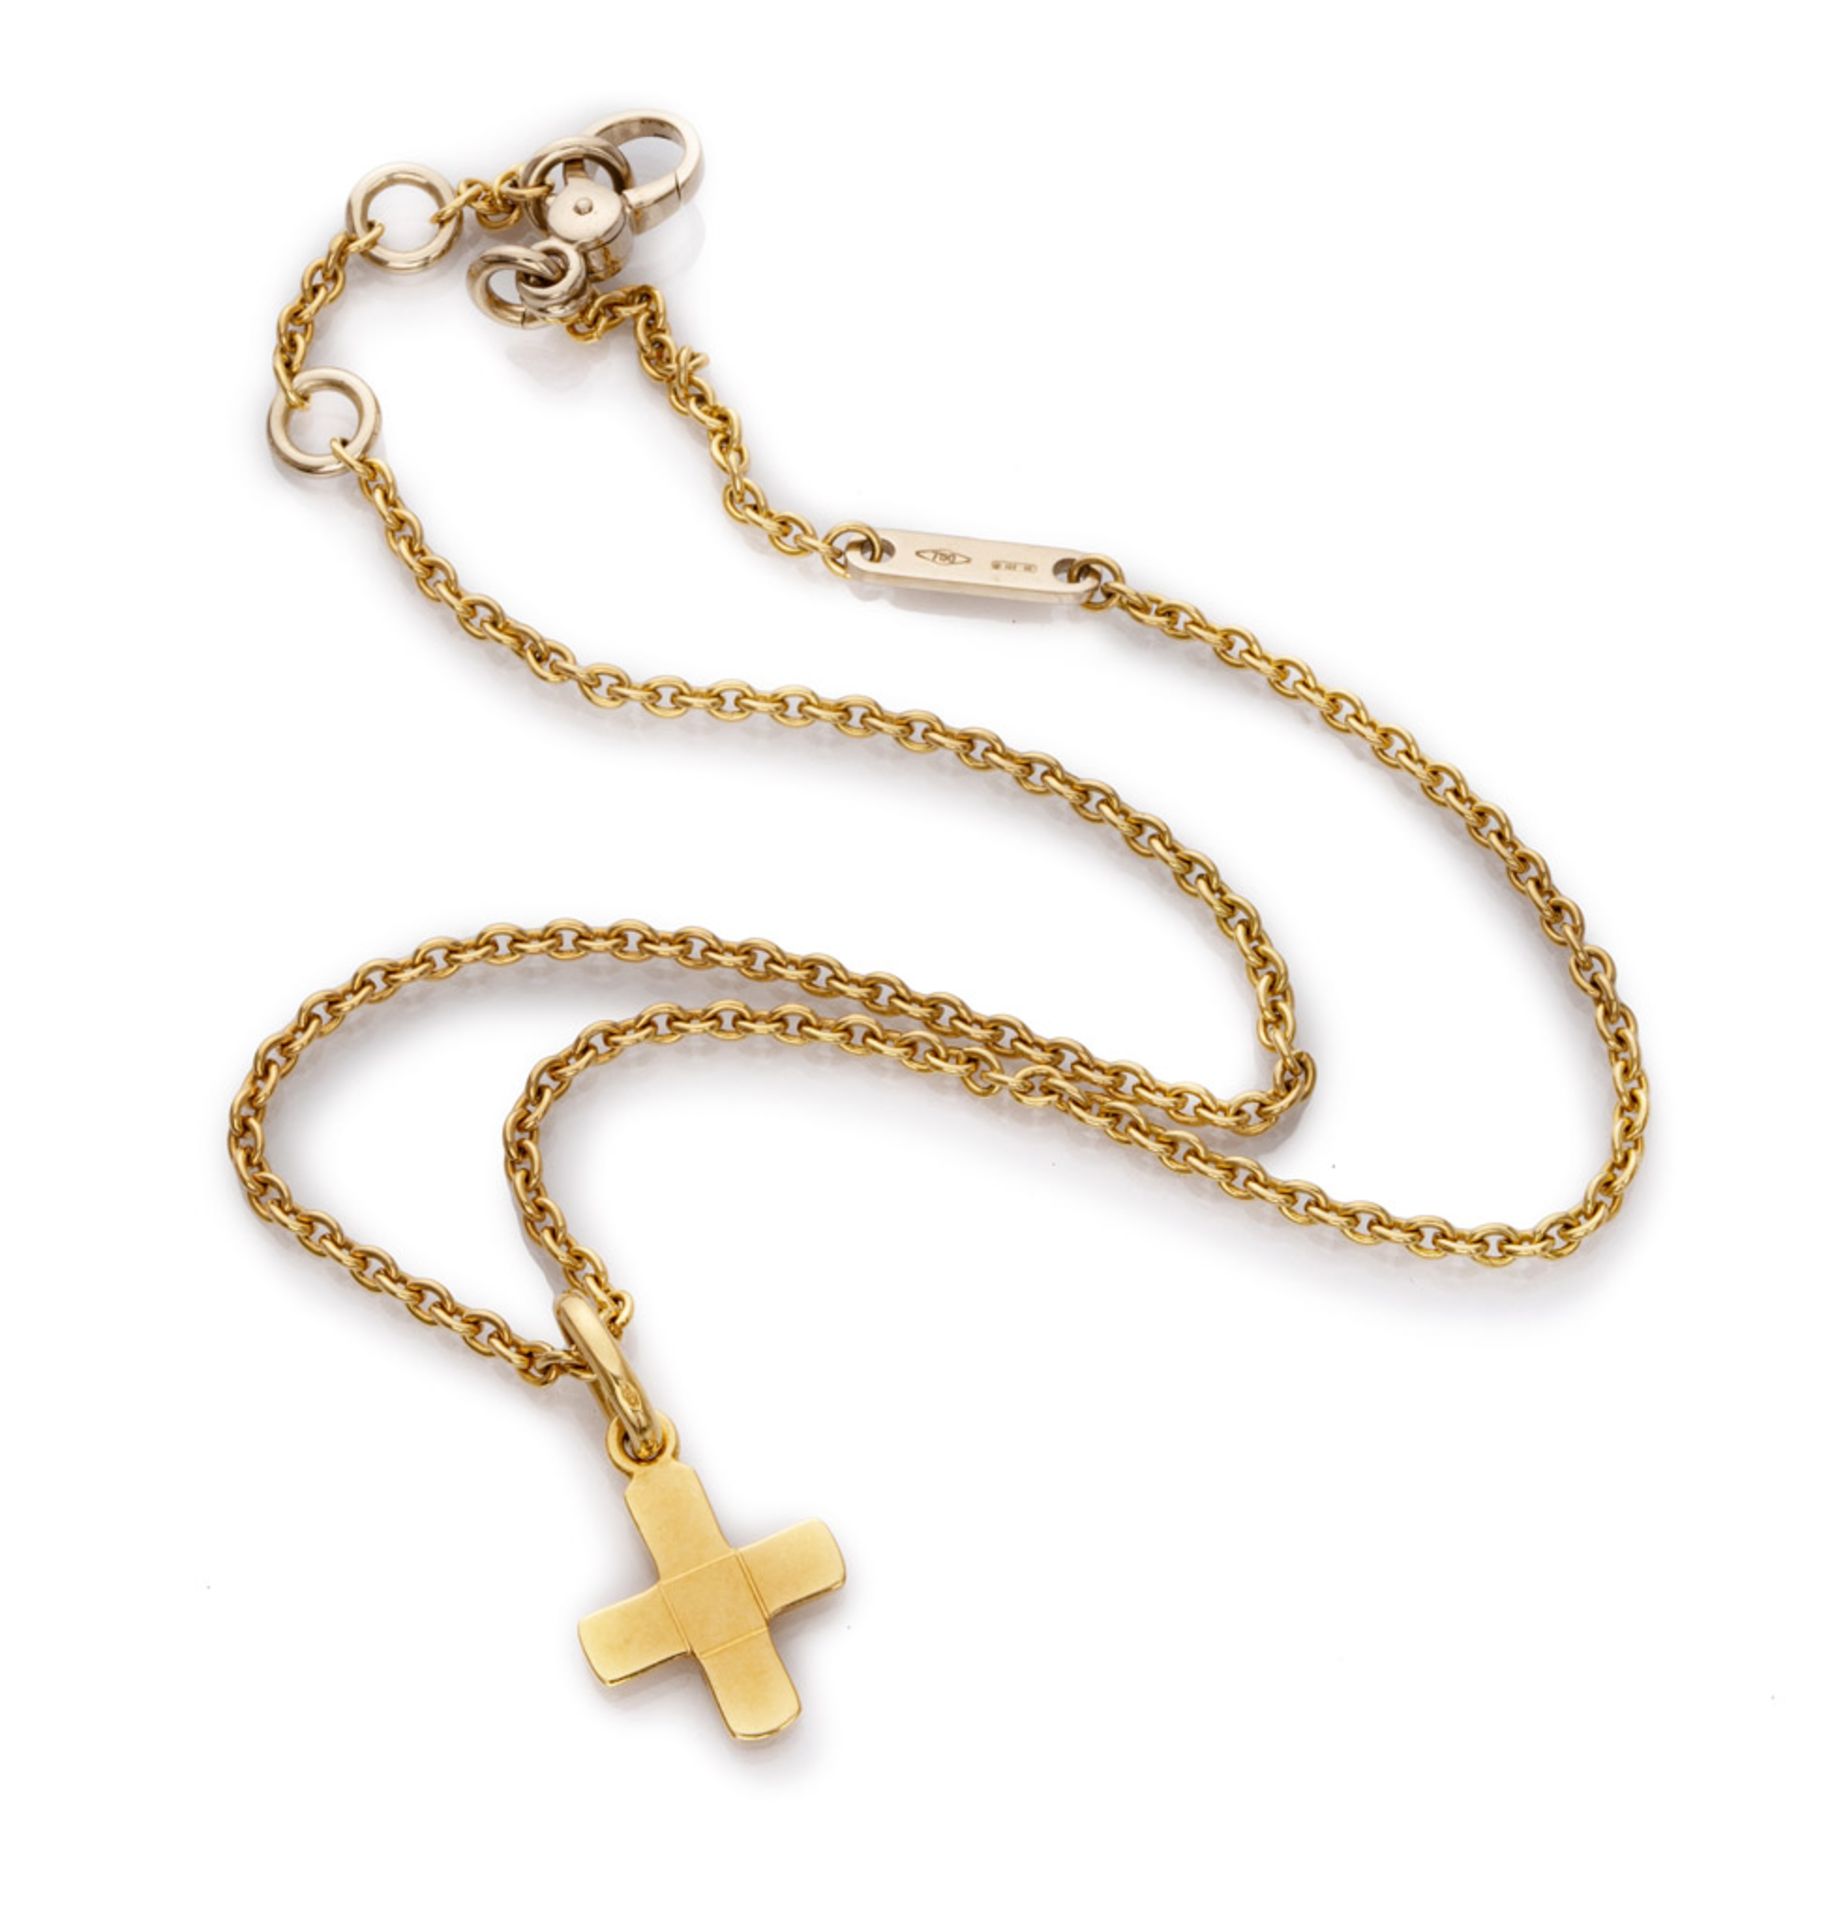 CHOKER POMELLATO in yellow gold 18 kts., with chain and cross pendant. Length cm. 42, total weight